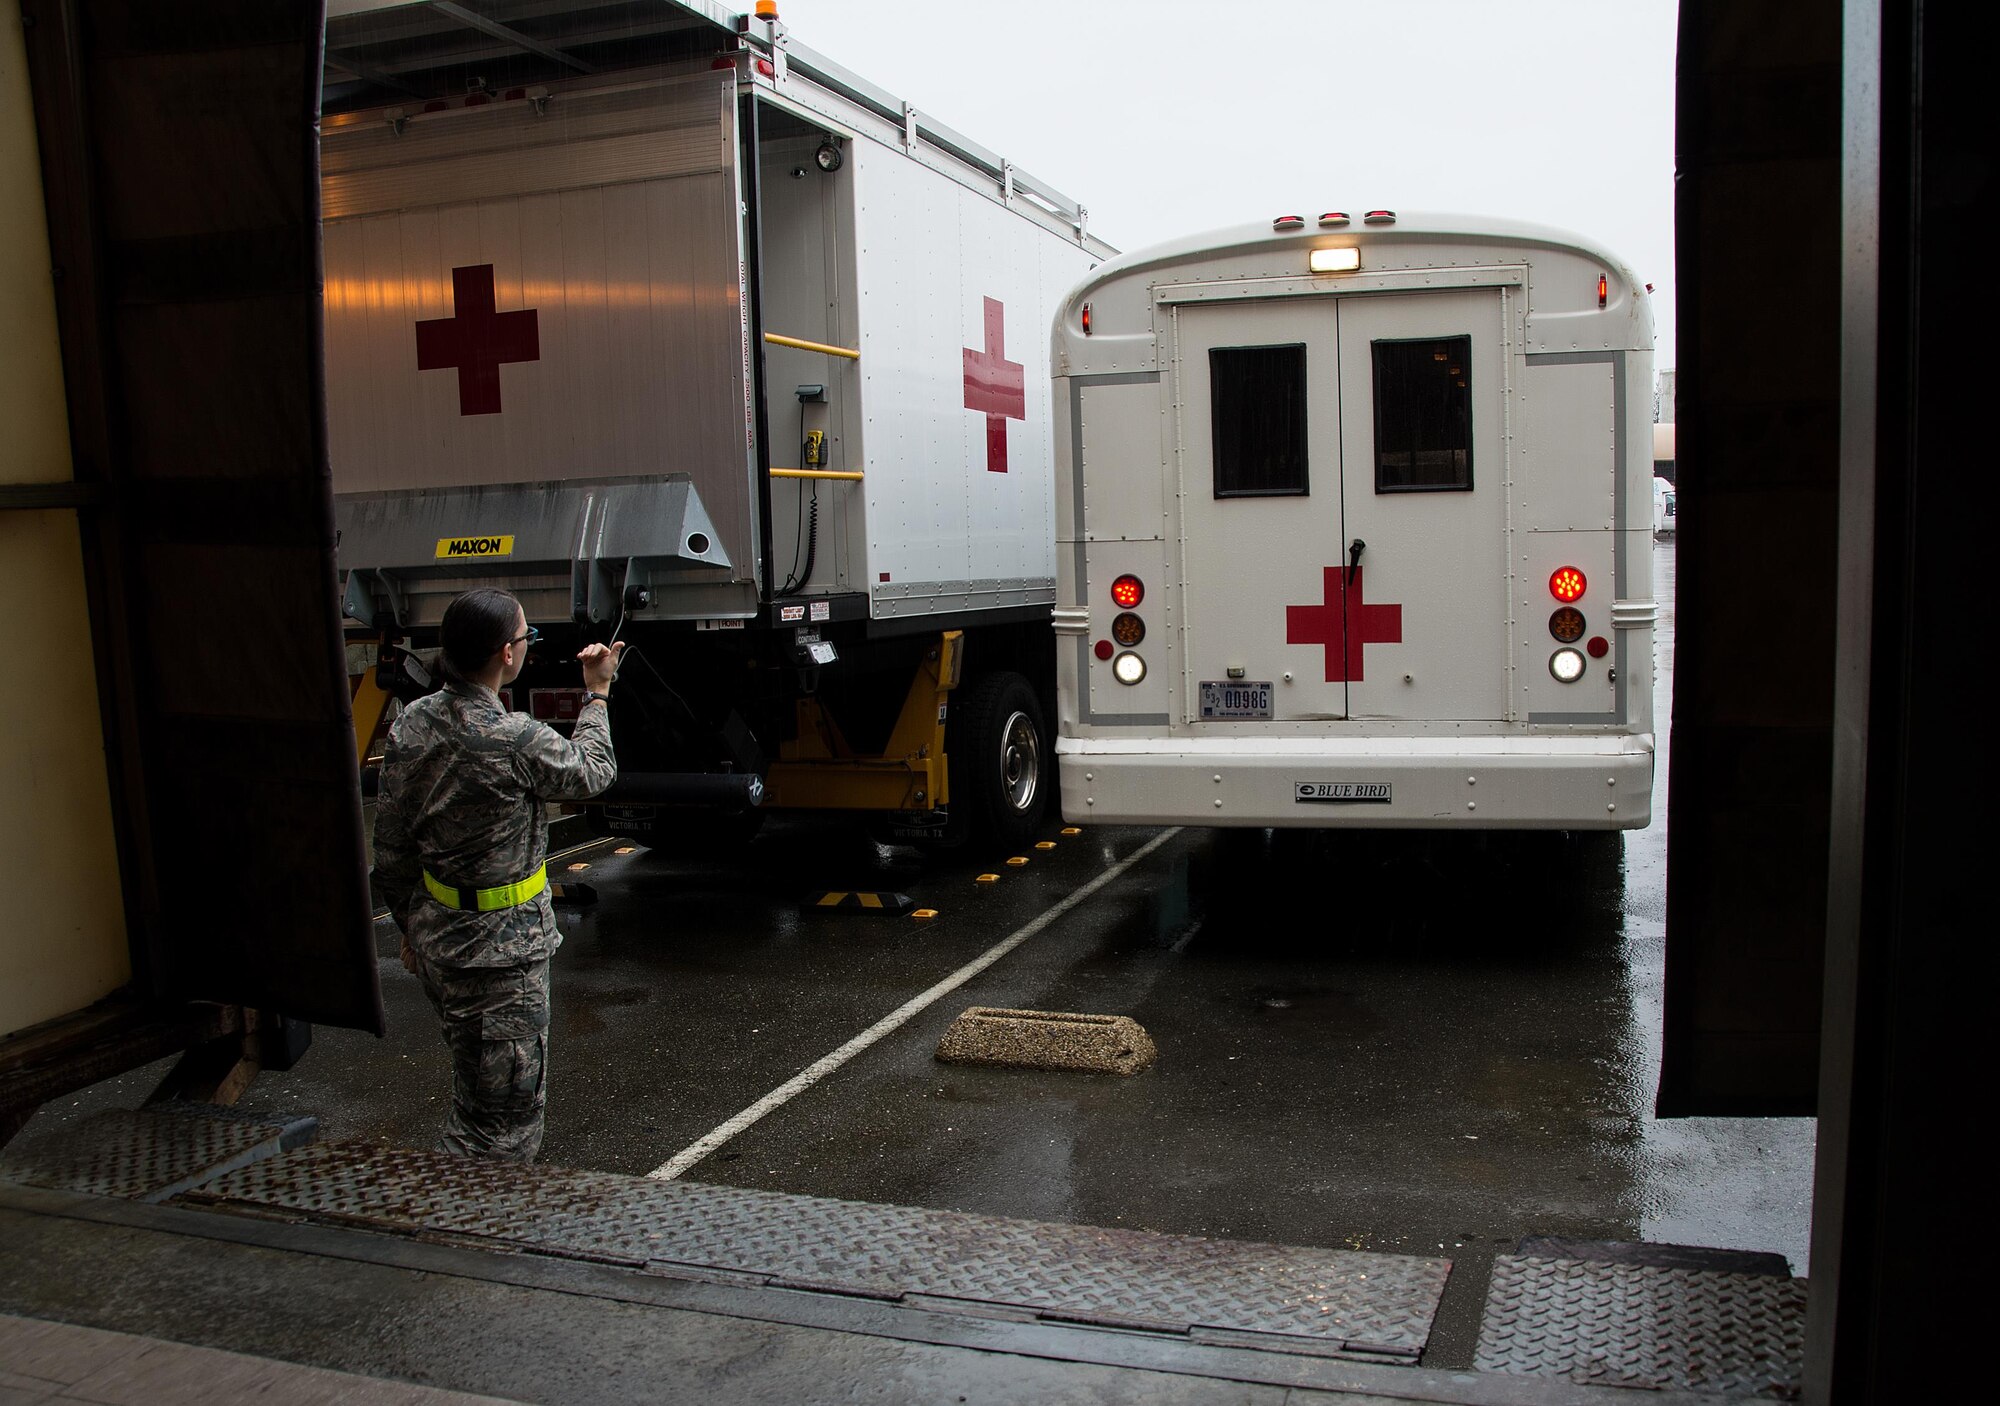 1st Lt. Andrea Nofi, 60th Inpatient Squadron nurse, guides an ambulance bus to the edge of a loading dock at David Grant U.S. Air Force Medical Center at Travis Air Force Base, Calif., on March 24, 2017. Members of the 60th IPTS participated in the Air Force Reserve exercise Patriot Delta, providing enroute patient care. (U.S. Air Force photo by Staff Sgt. Daniel Phelps)